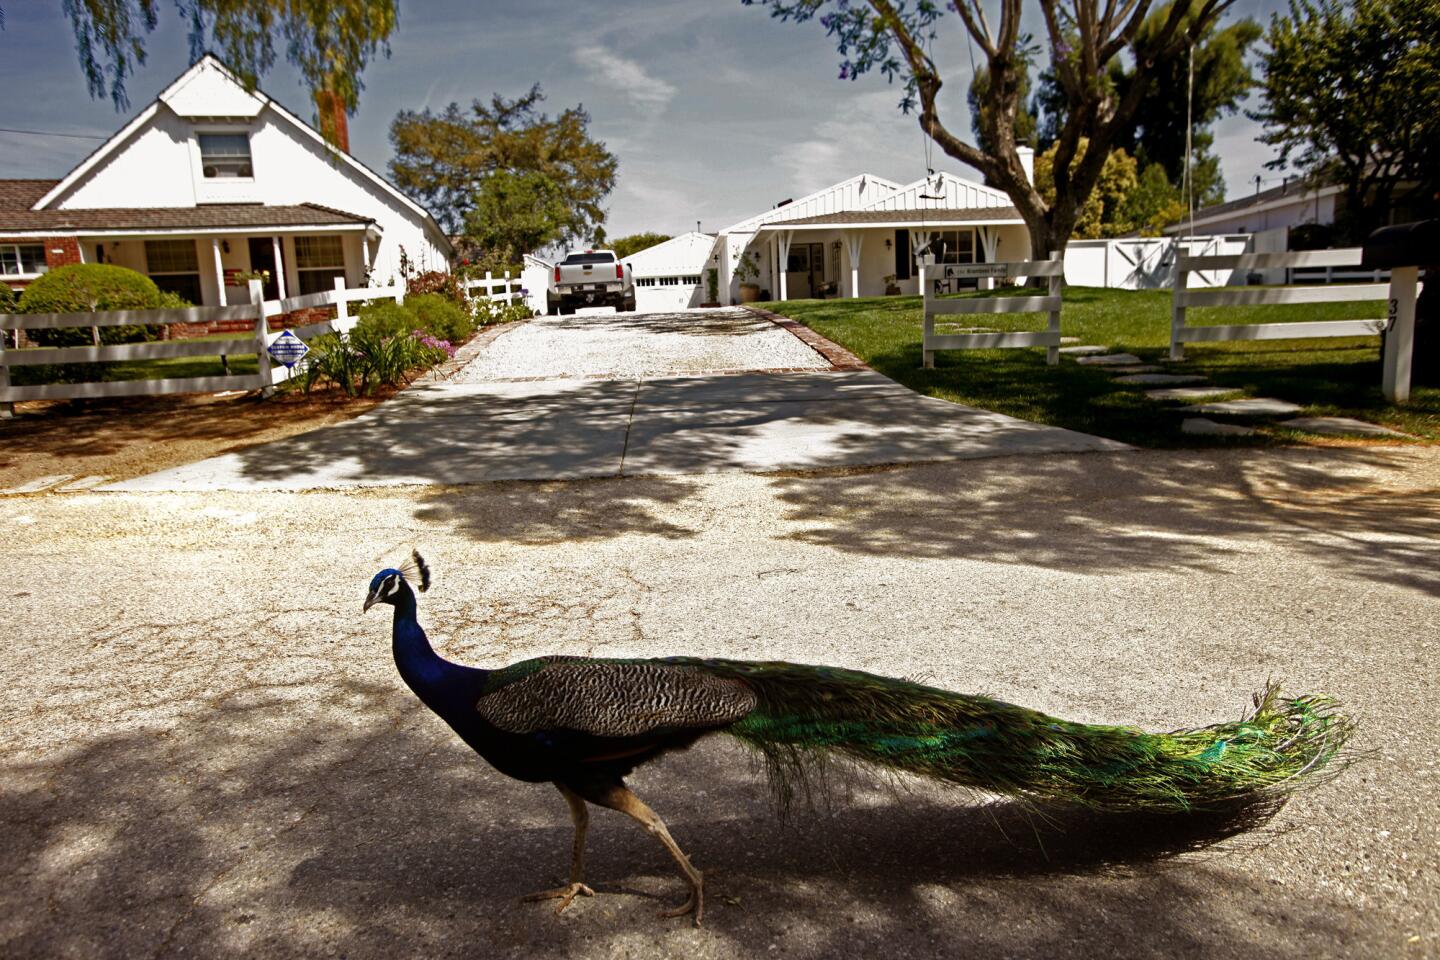 Indian blue peacocks were imported to the Palos Verdes Peninsula a century ago.